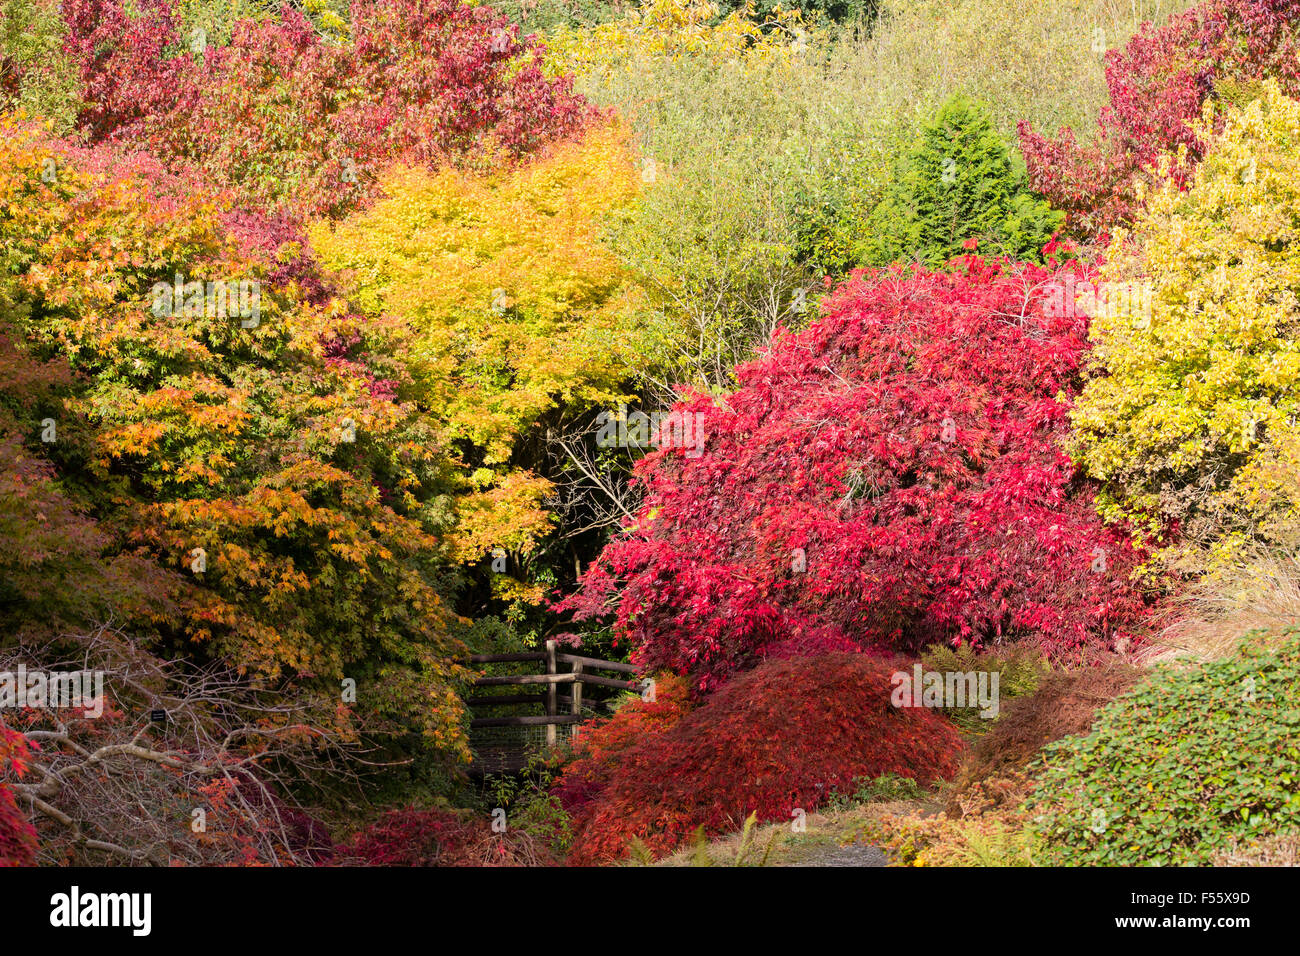 Gold and red autumn colour in the foliage of Japanese maples in the Acer glade at The Garden House, Devon, UK Stock Photo